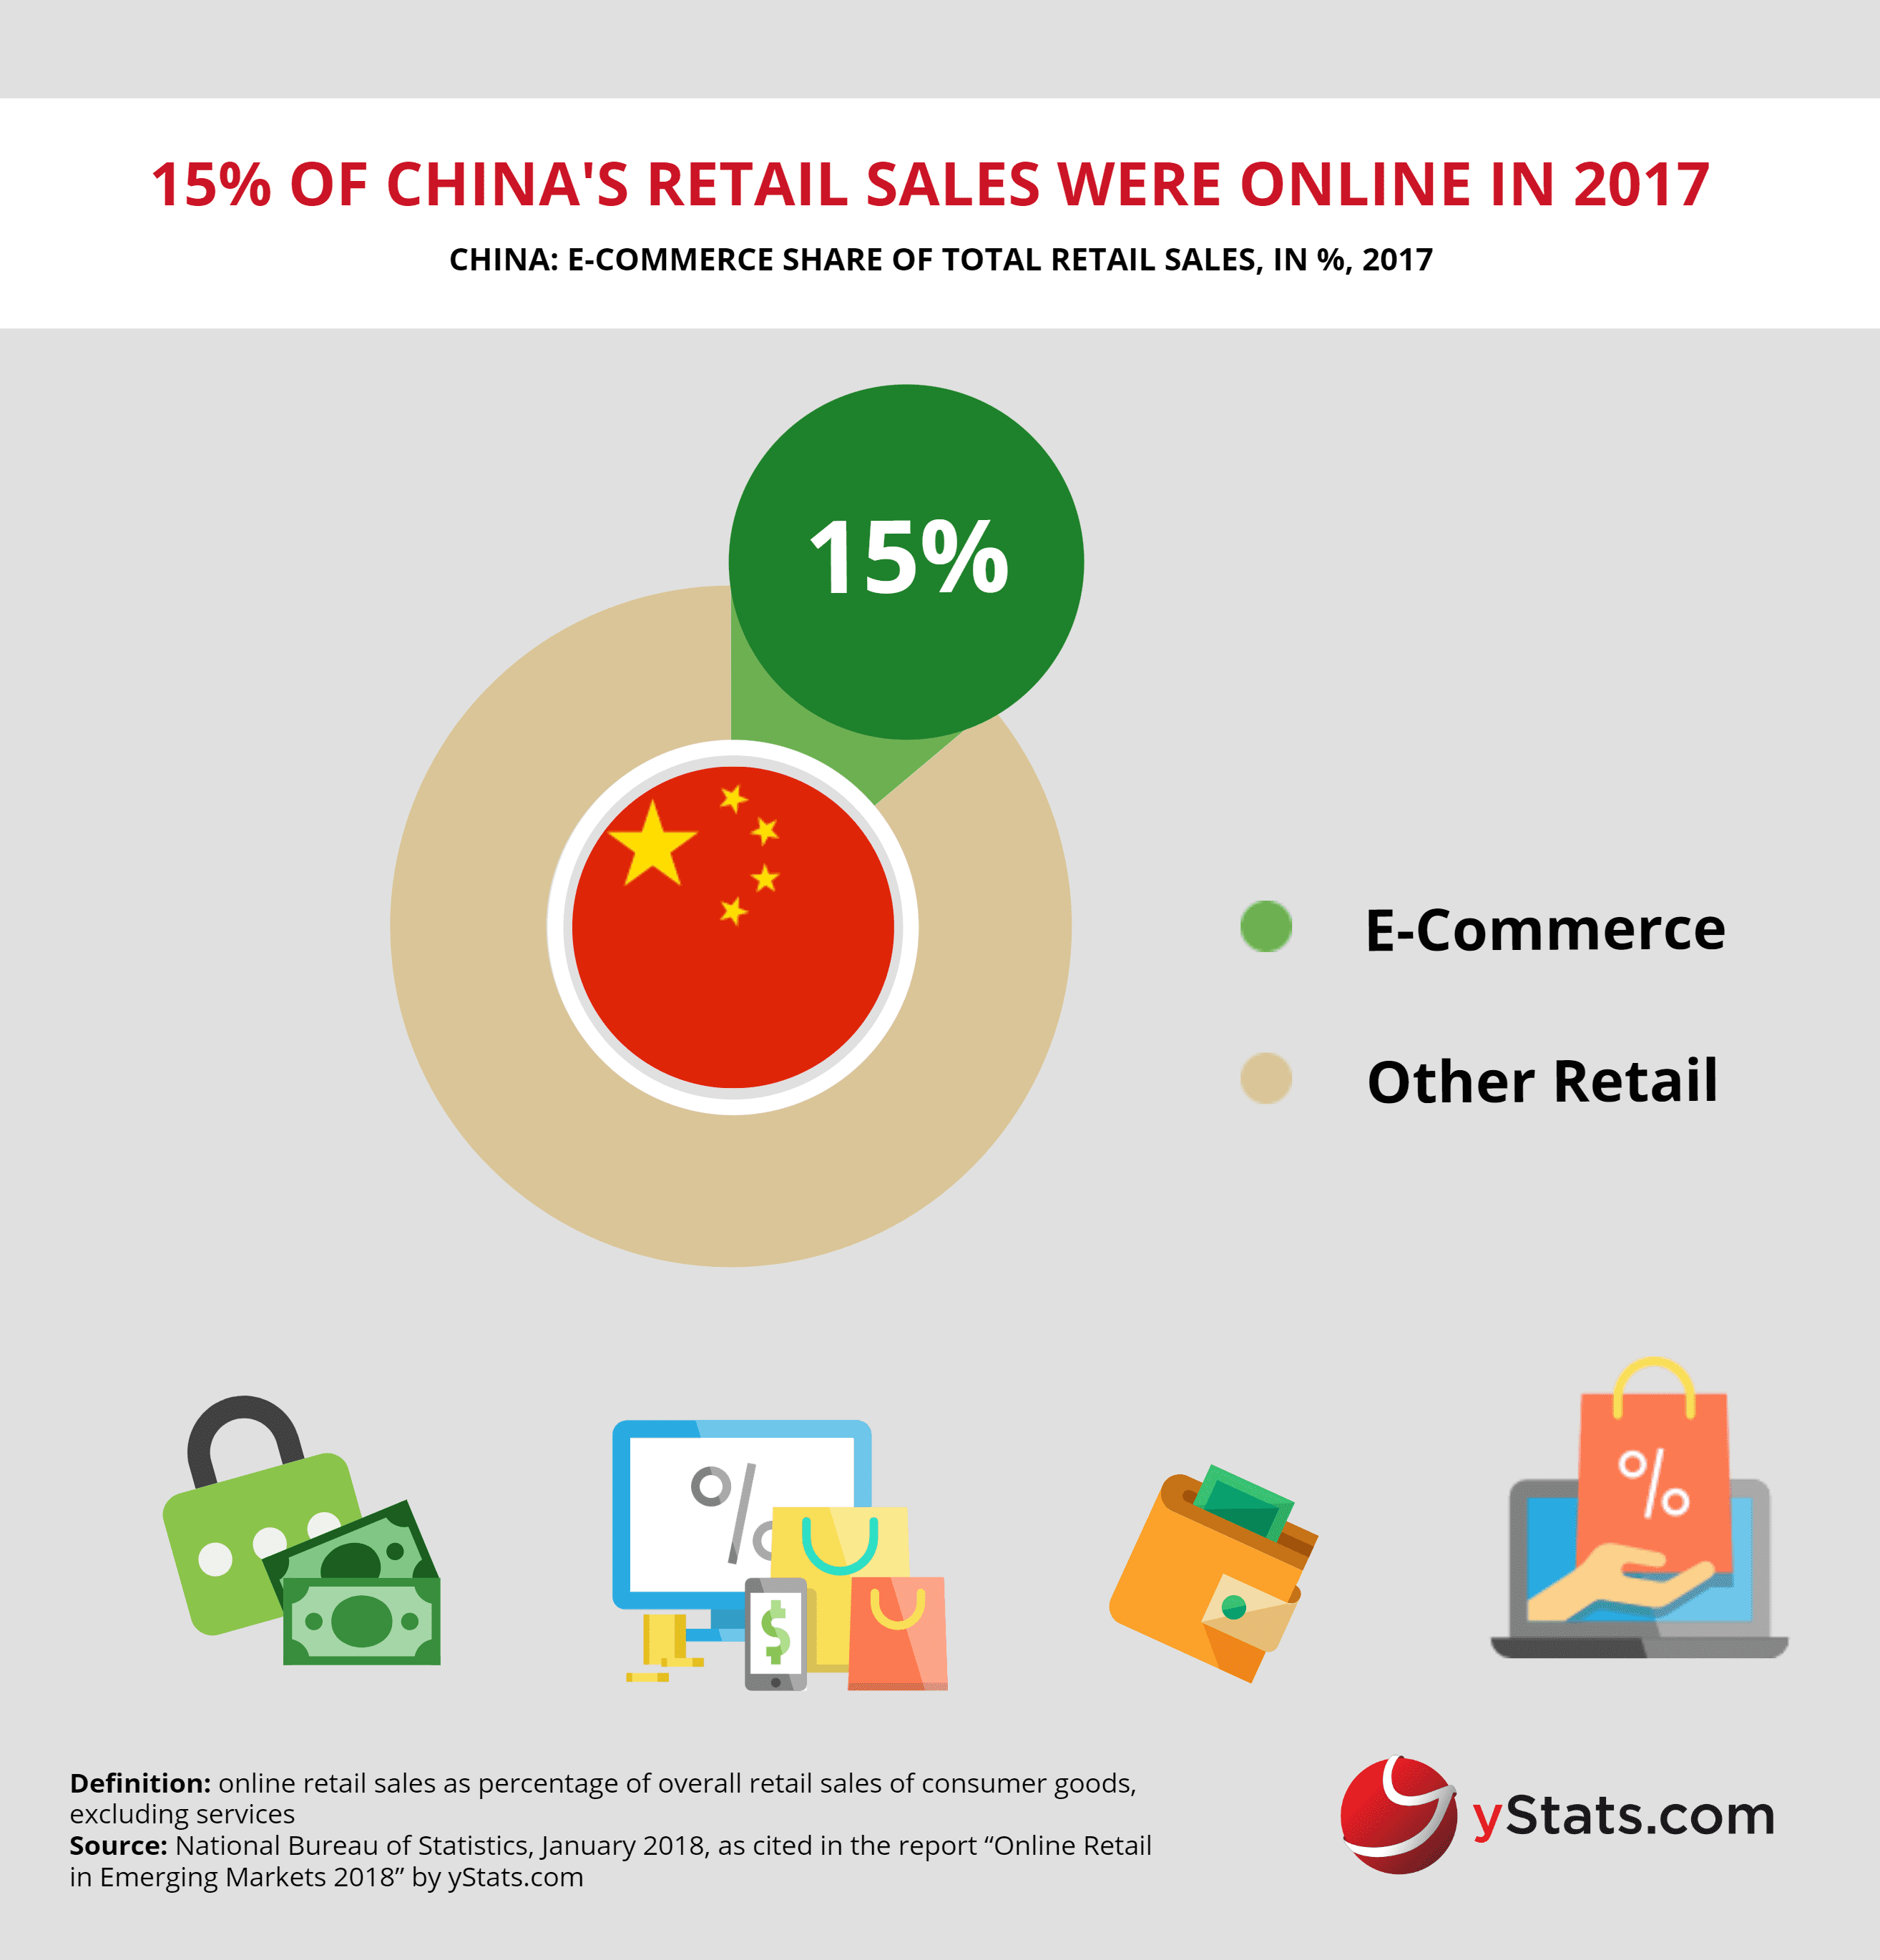 ecommerce share of retail sales in china